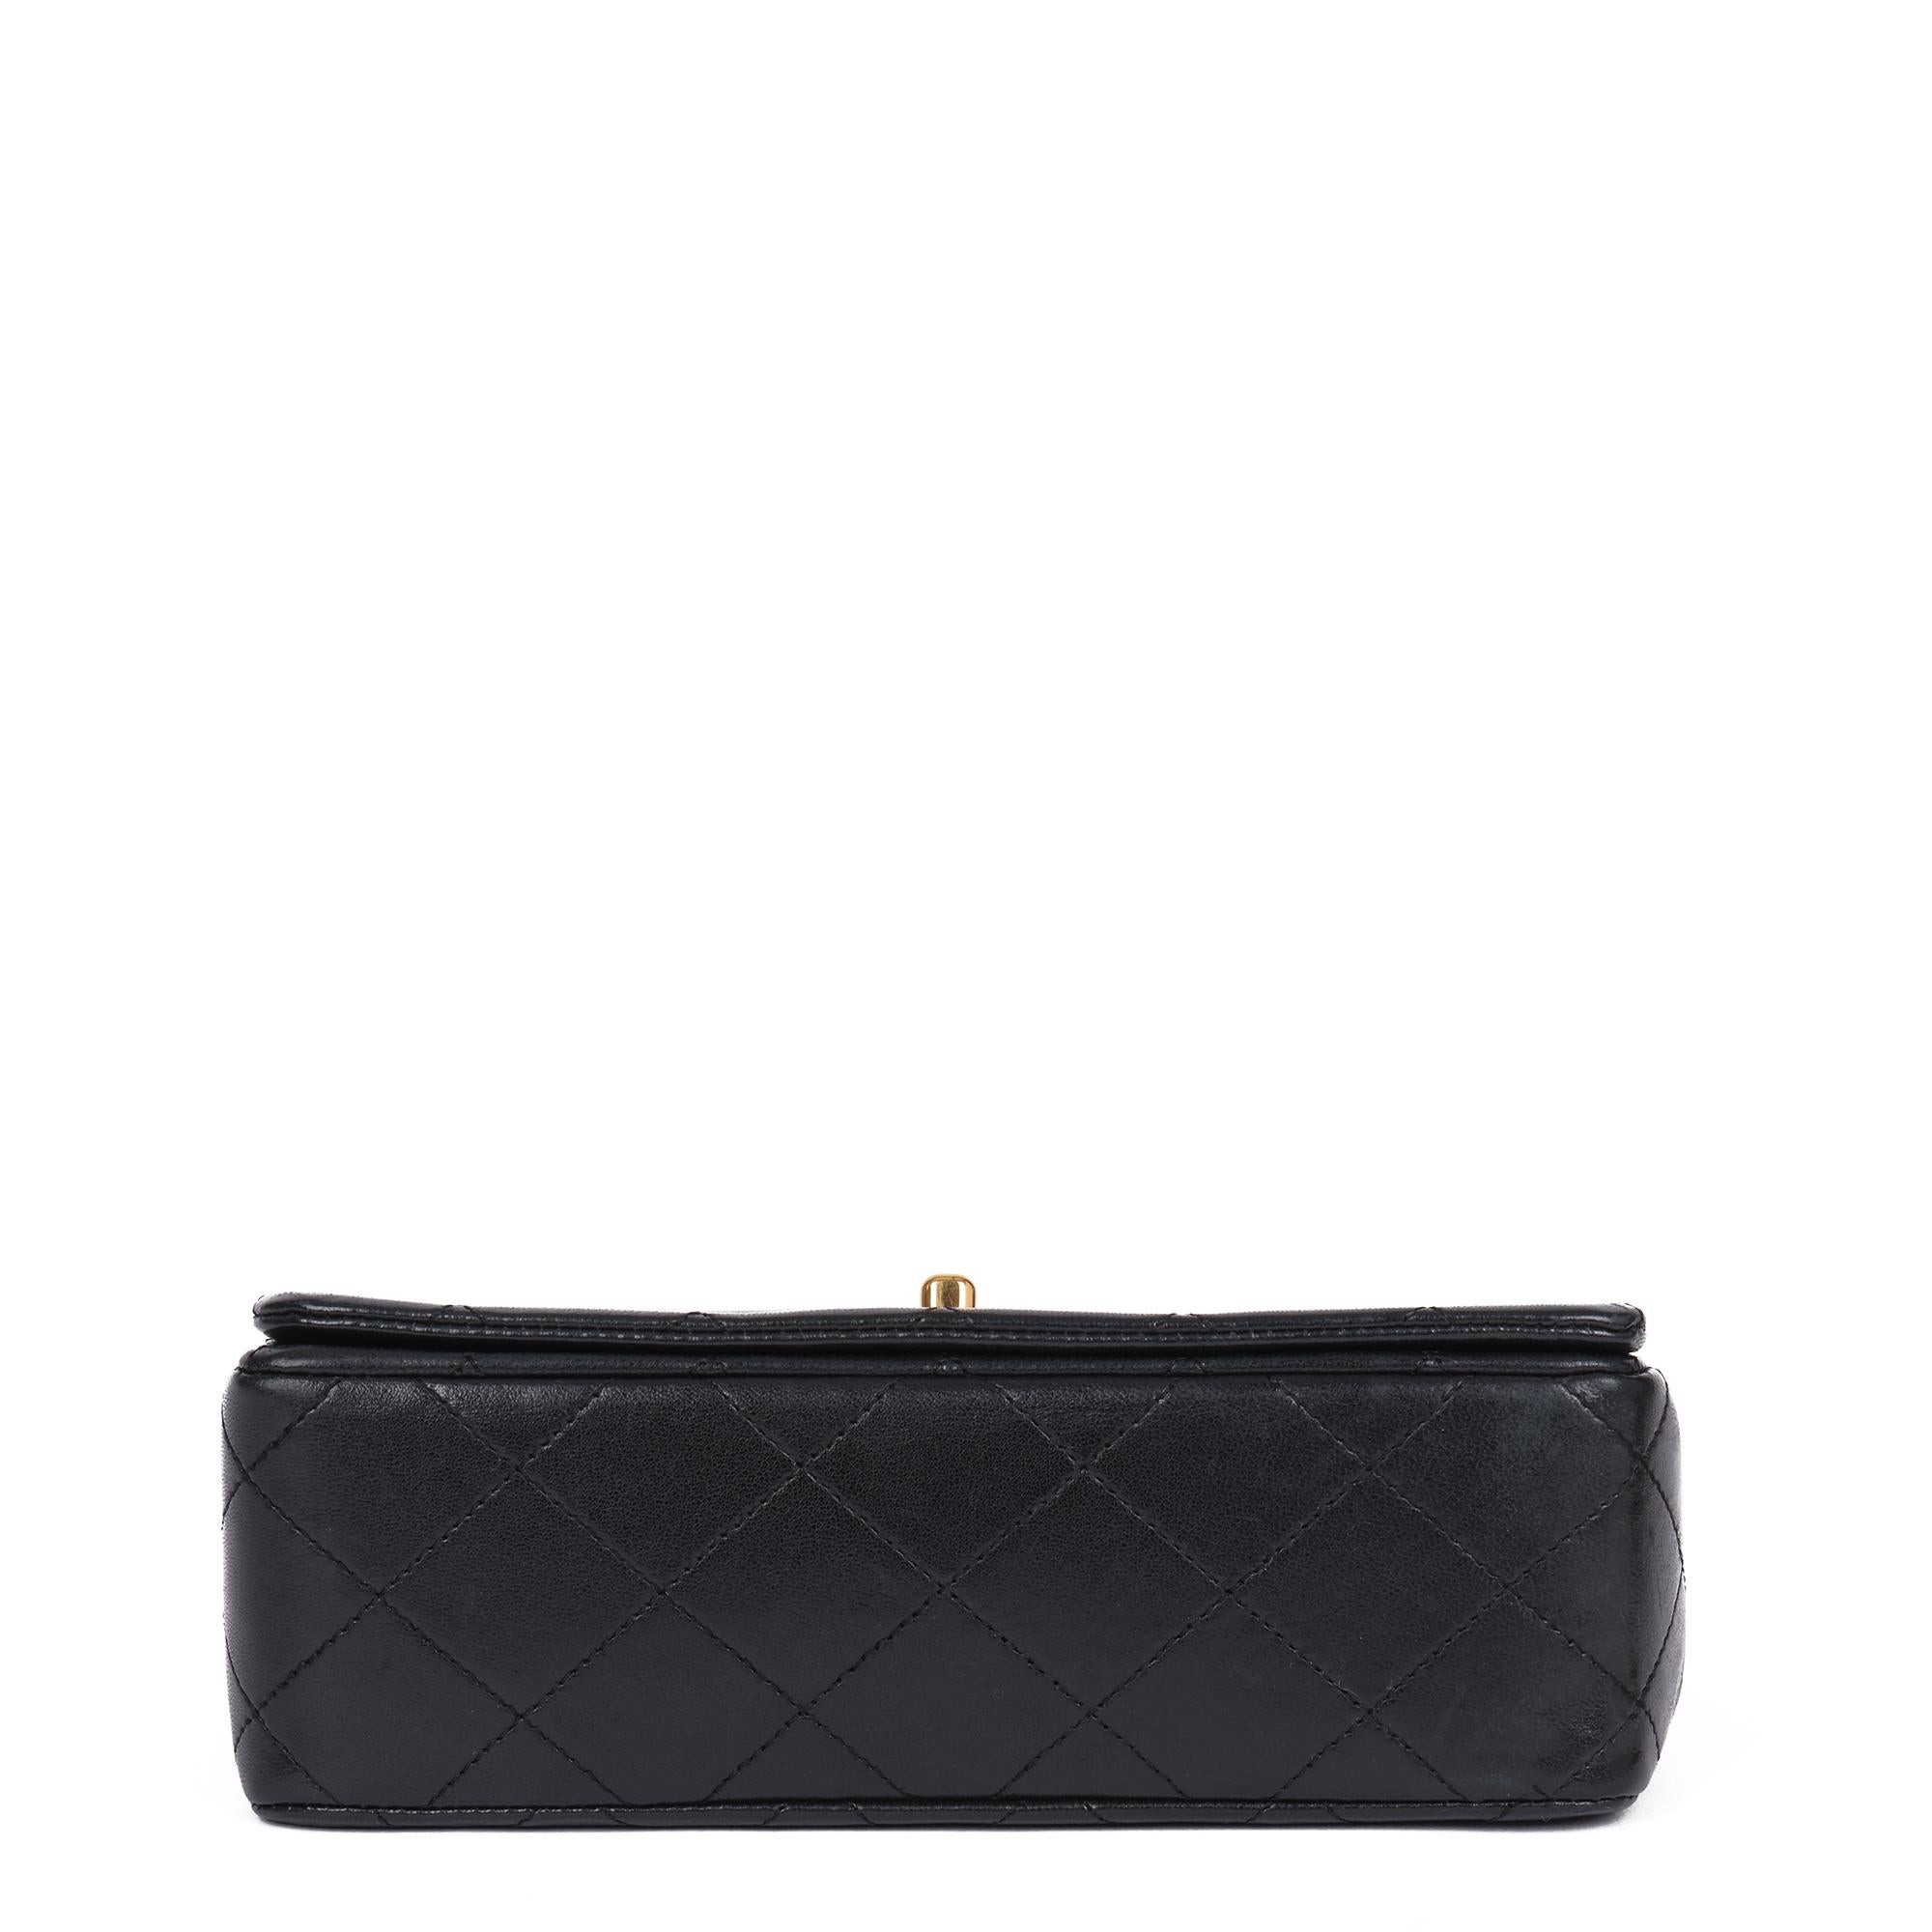 1991 Chanel Black Quilted Lambskin Vintage Mini Full Flap Bag 2